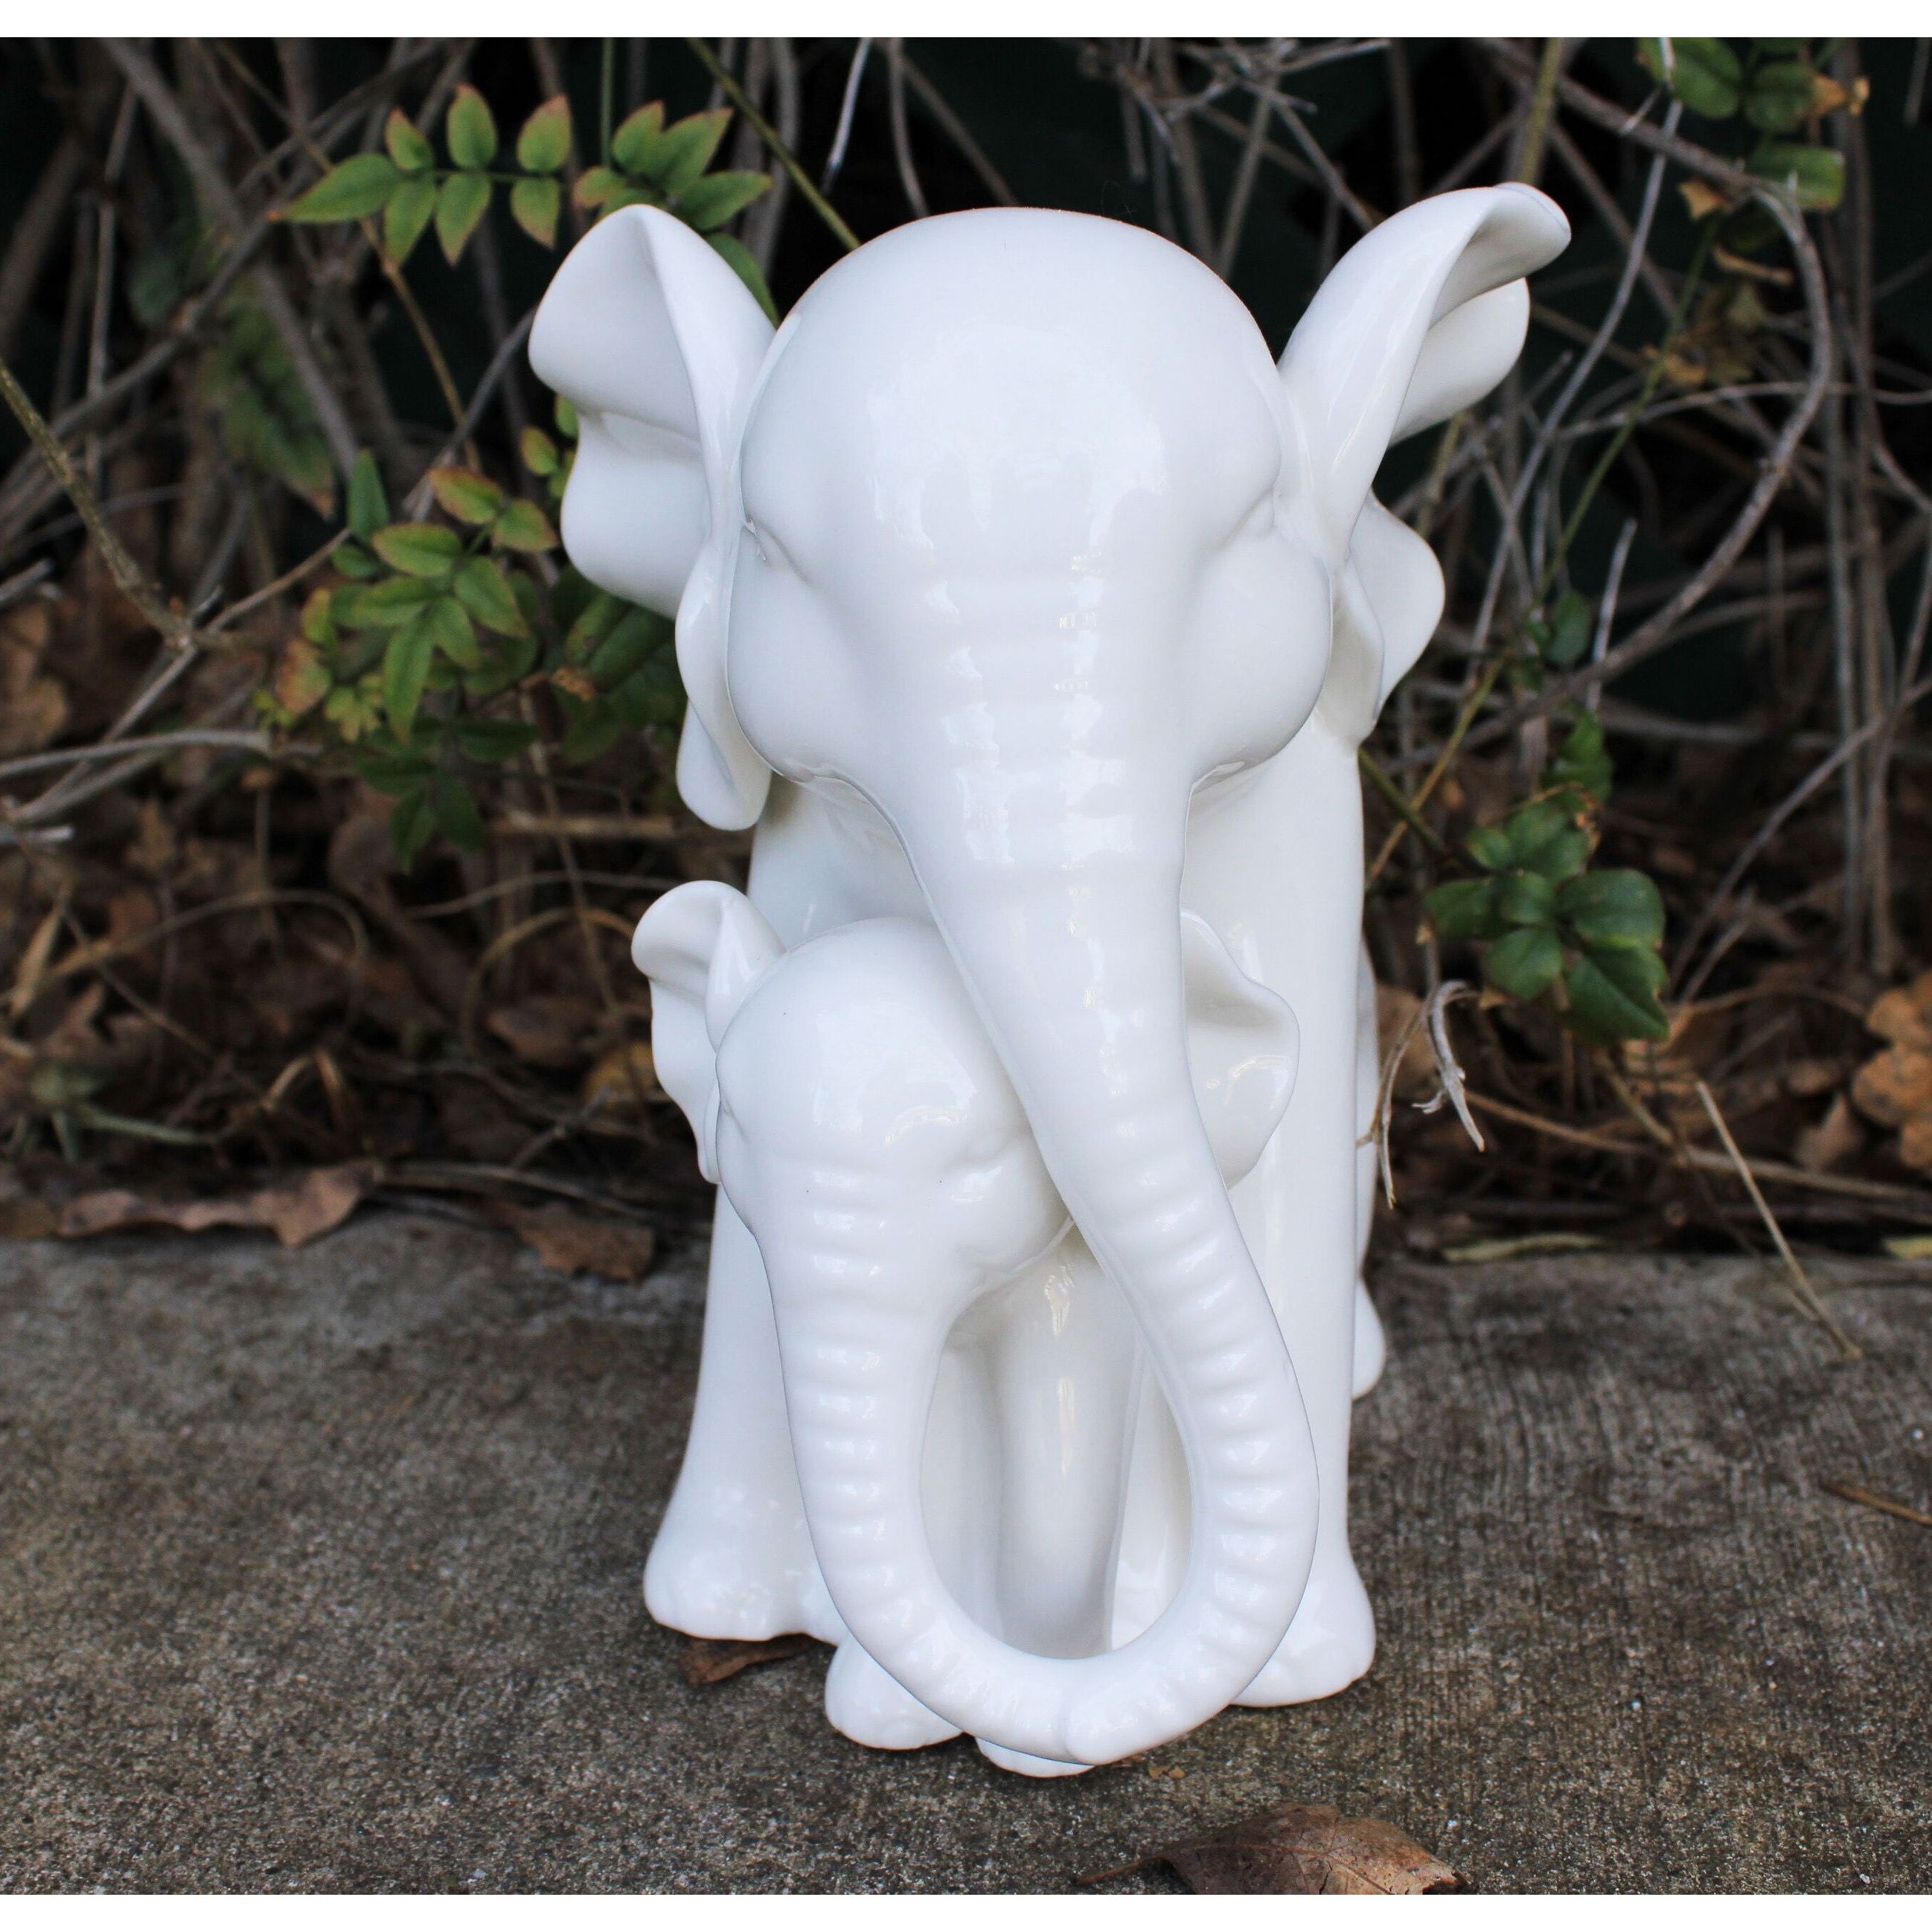 White Elephant Mother & Baby Figurine Ornament Sculpture Housewarming Gifts 